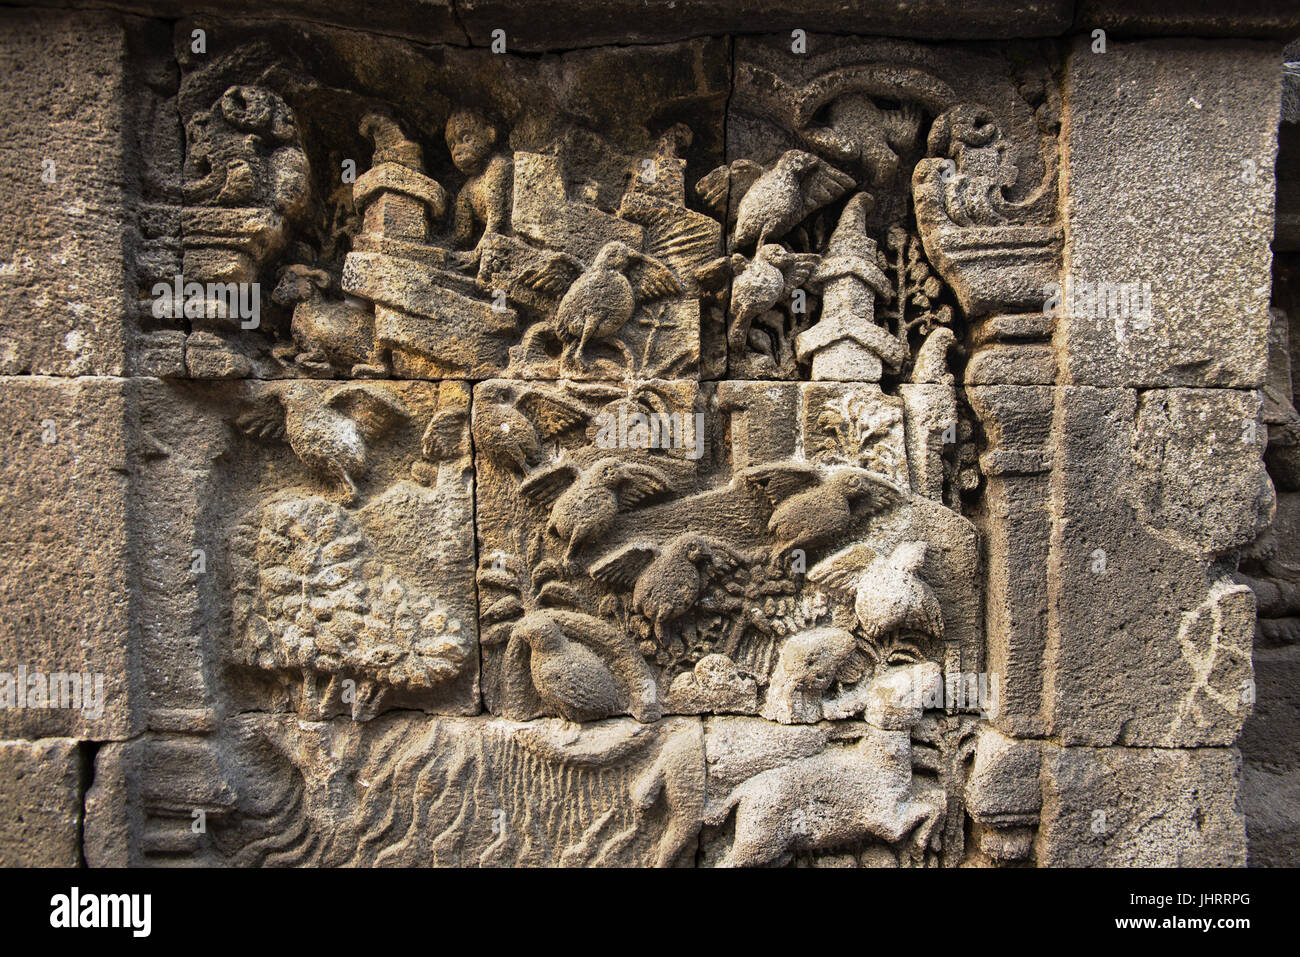 and - Alamy images stock photography Borobudur hi-res gallery relief